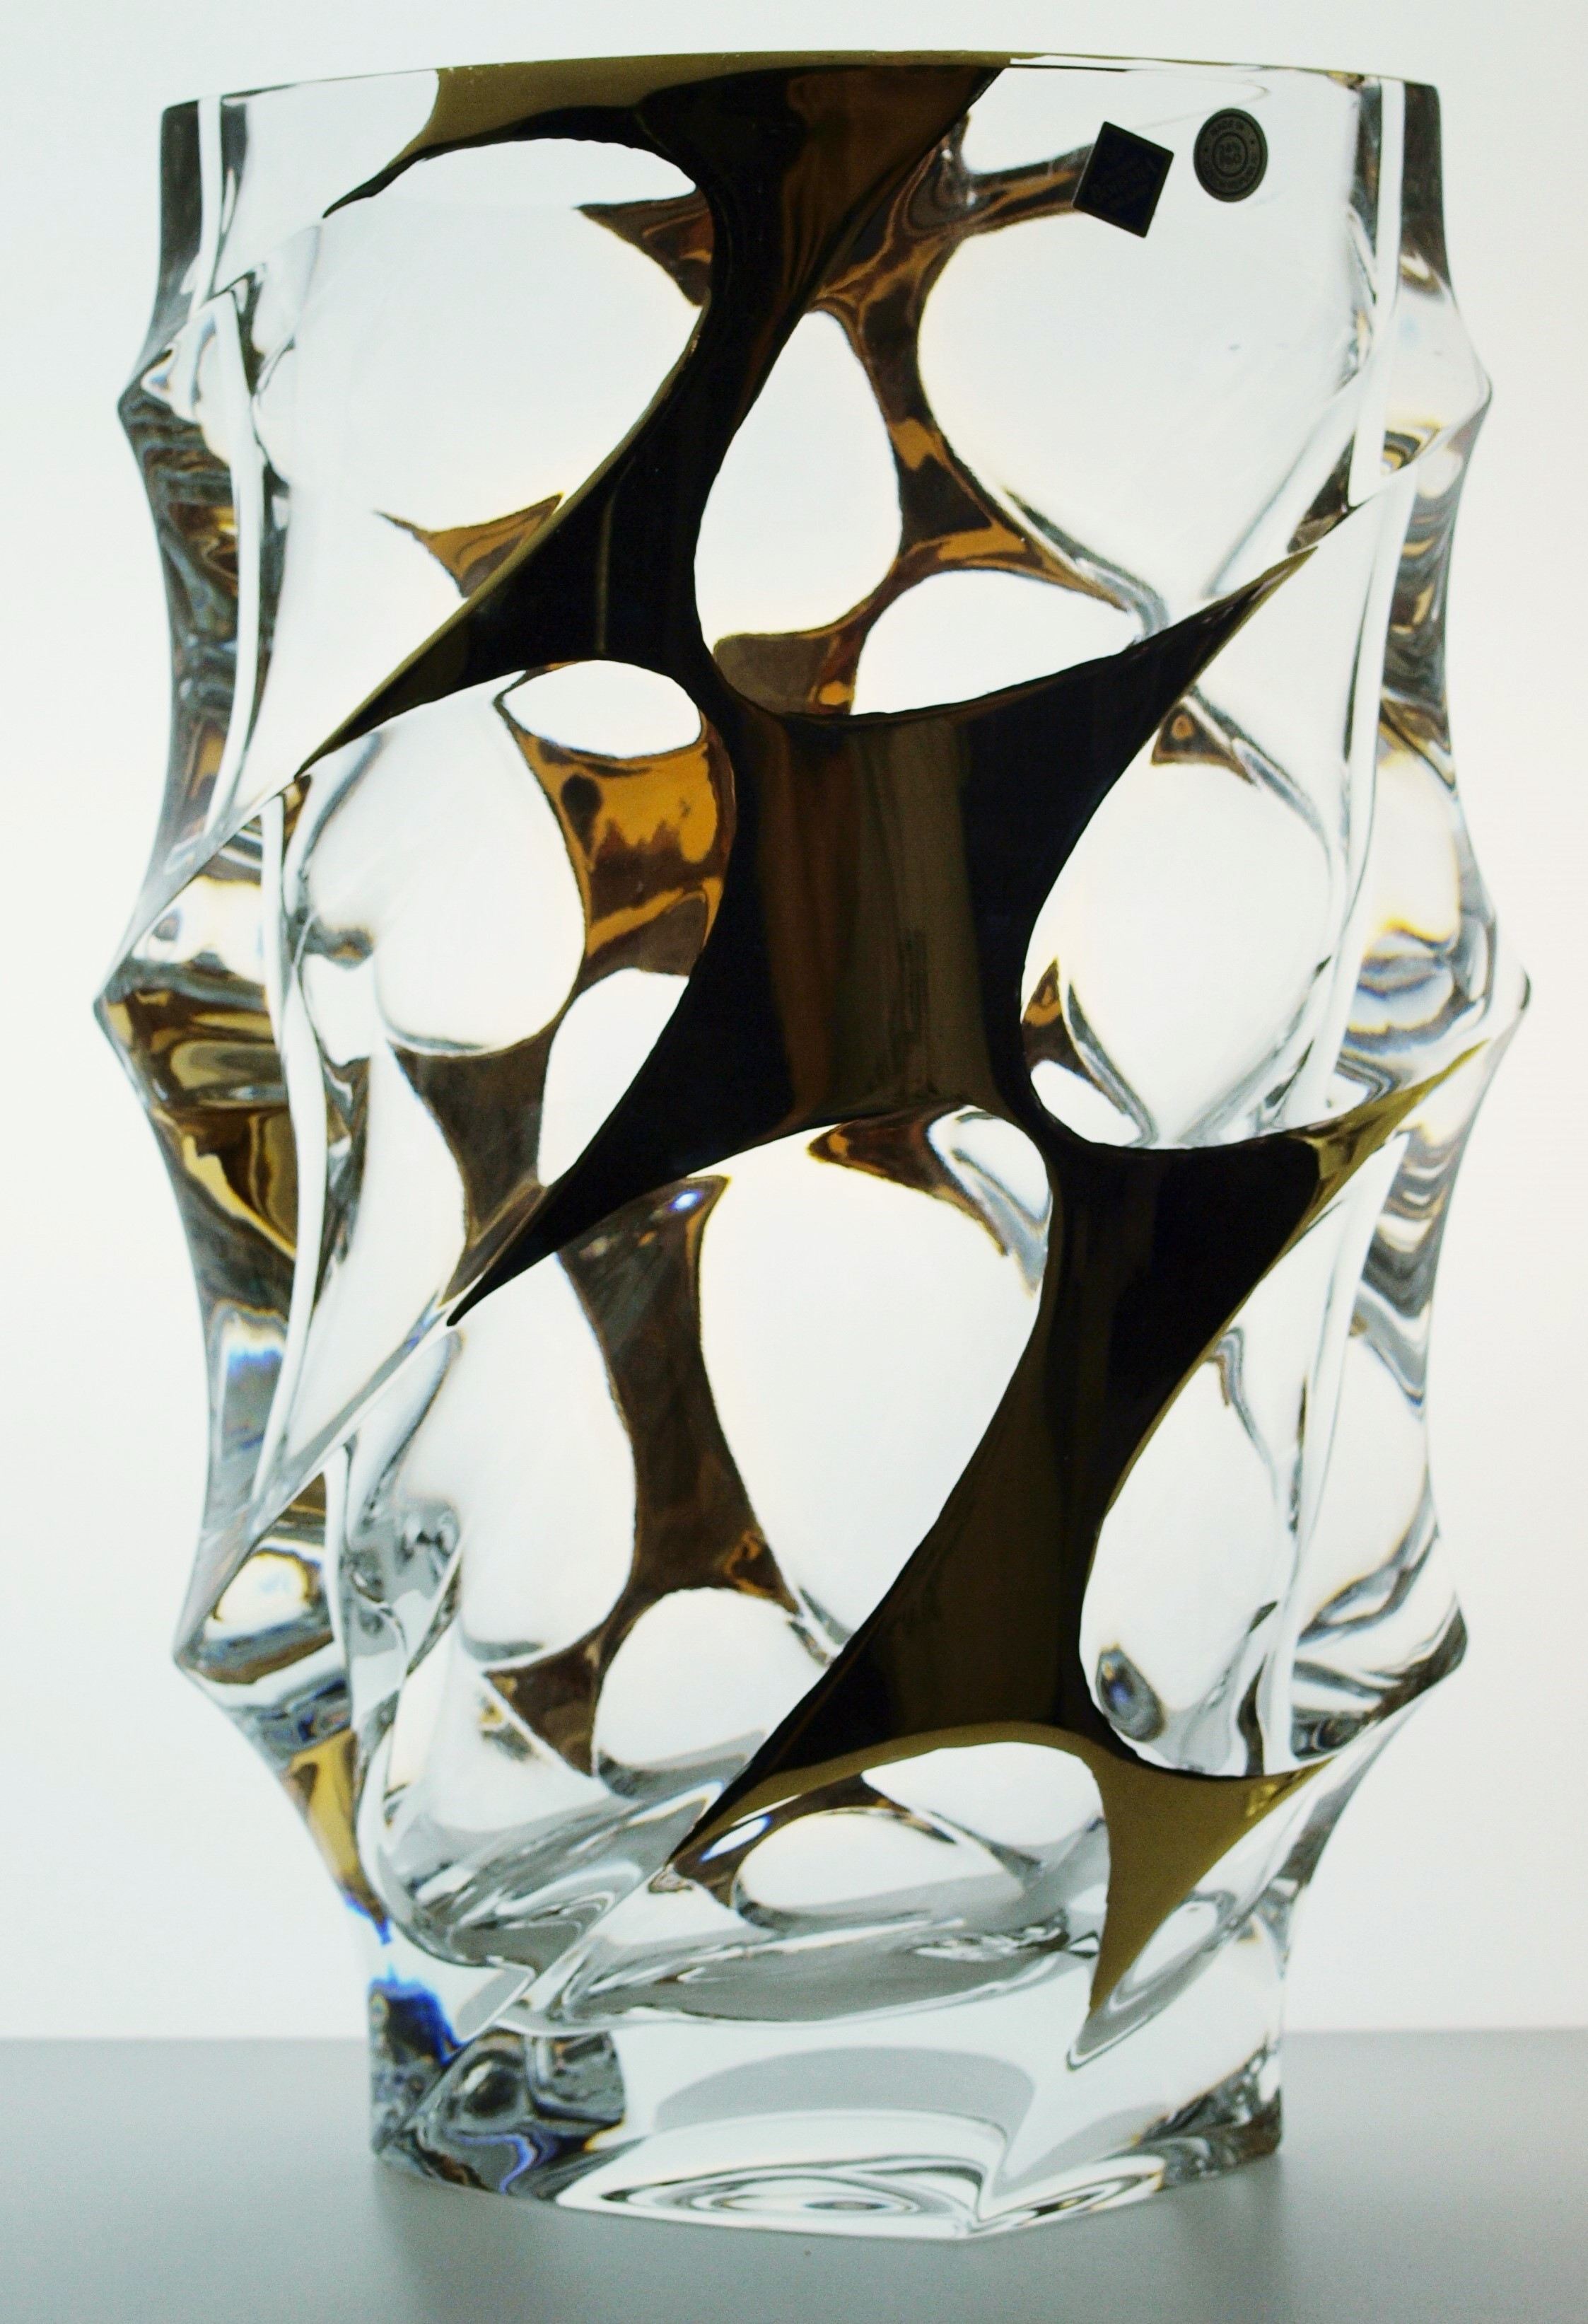 24 Spectacular Bohemia Czech Republic Lead Crystal Vase 2024 free download bohemia czech republic lead crystal vase of gold glass vase with unique modern design made from full lead crystal intended for glass vase calypso gold